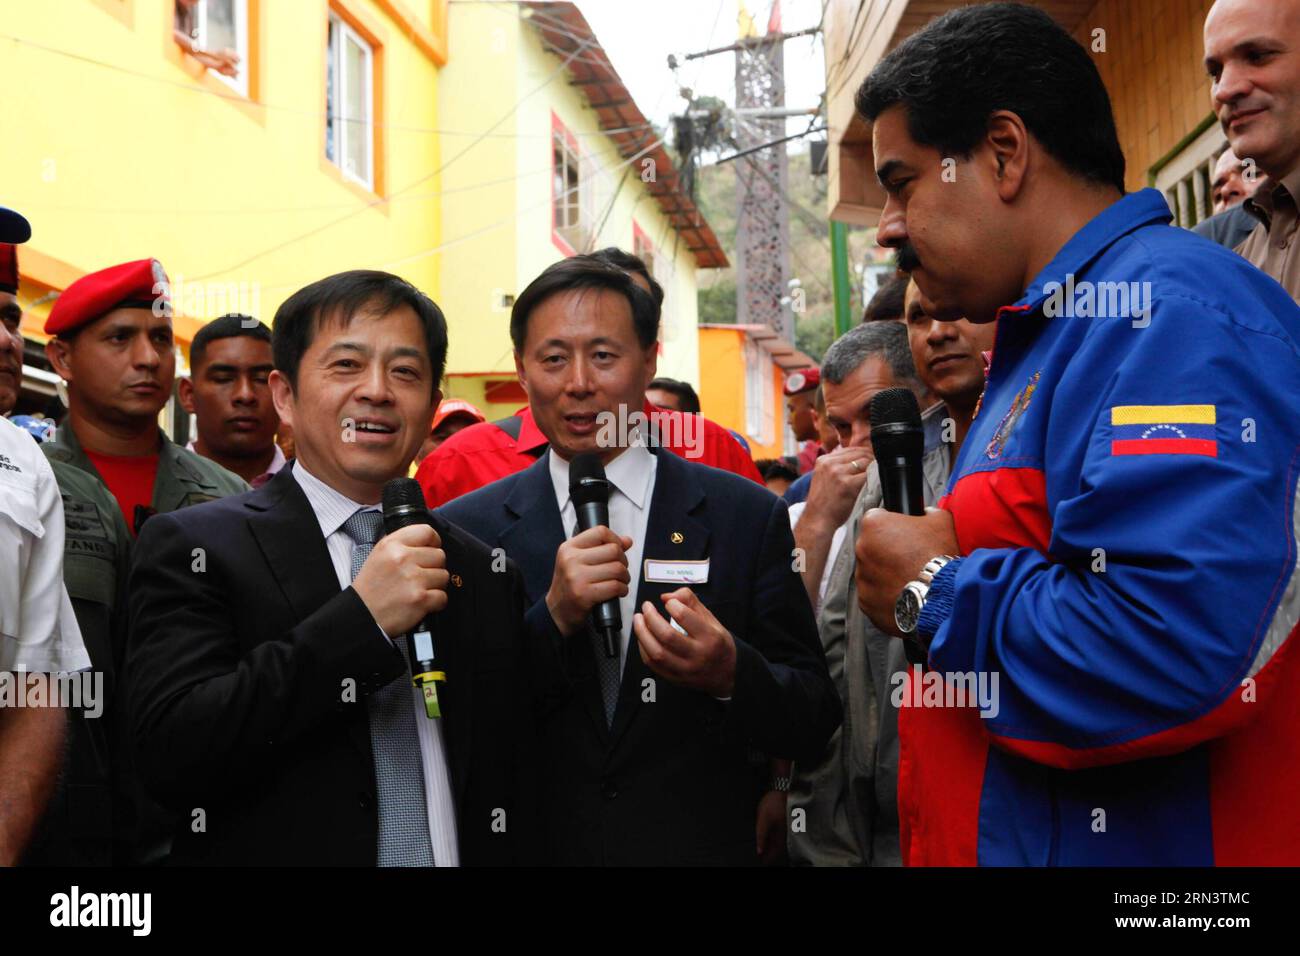 (150426) -- CARACAS, April 25, 2015 -- Image provided by shows Venezuelan President Nicolas Maduro (R) and the regional manager in Latin America of Chinese company Sany Heavy Industry Co. Ltd, Xu Ming (C), taking part in a tour in a slum in Caracas, Venezuela, on April 25, 2015. Venezuelan President Nicolas Maduro said Saturday the government will work with Chinese companies to build new housing units as part of an ambitious plan to provide homes for those without proper or adequate dwelling in the country.)(fnc) VENEZUELA-CARACAS-CHINA-POLITICS-MADURO VENEZUELA SxPRESIDENCY PUBLICATIONxNOTxIN Stock Photo